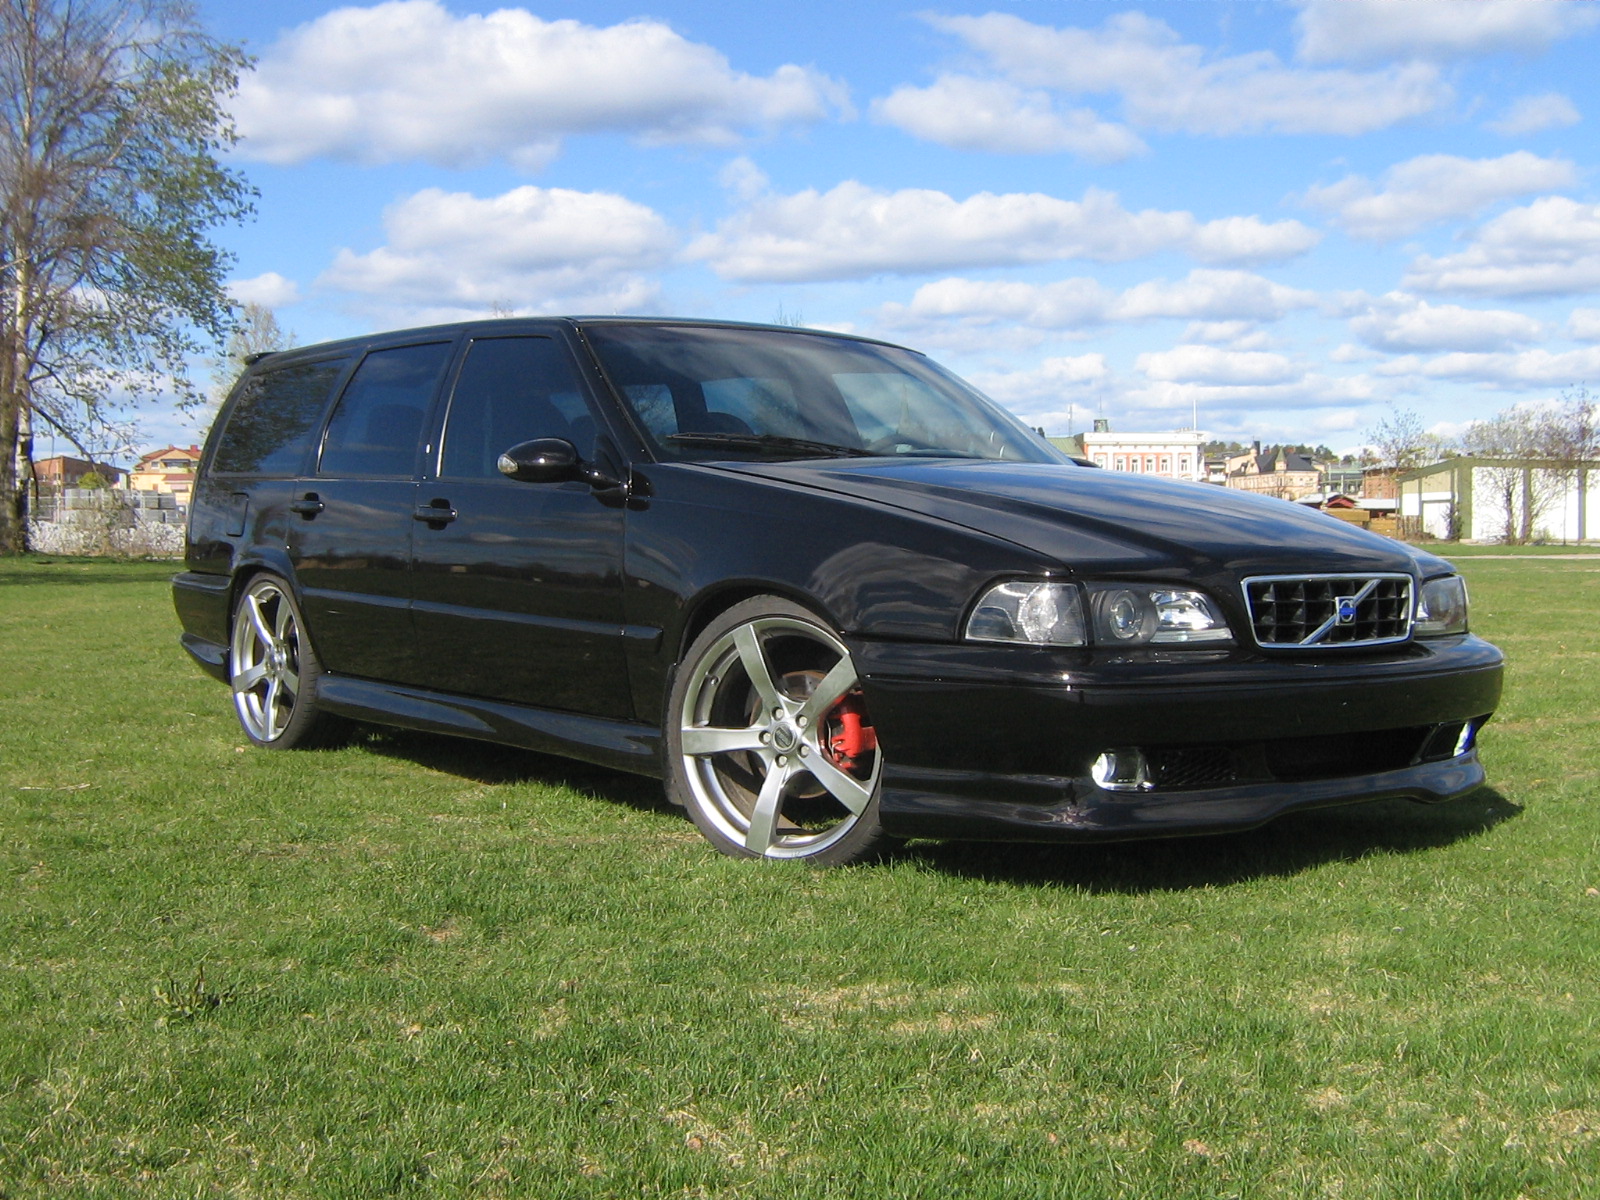 1999 Volvo V70 picture · 55 pictures · 2 videos · 16 reviews